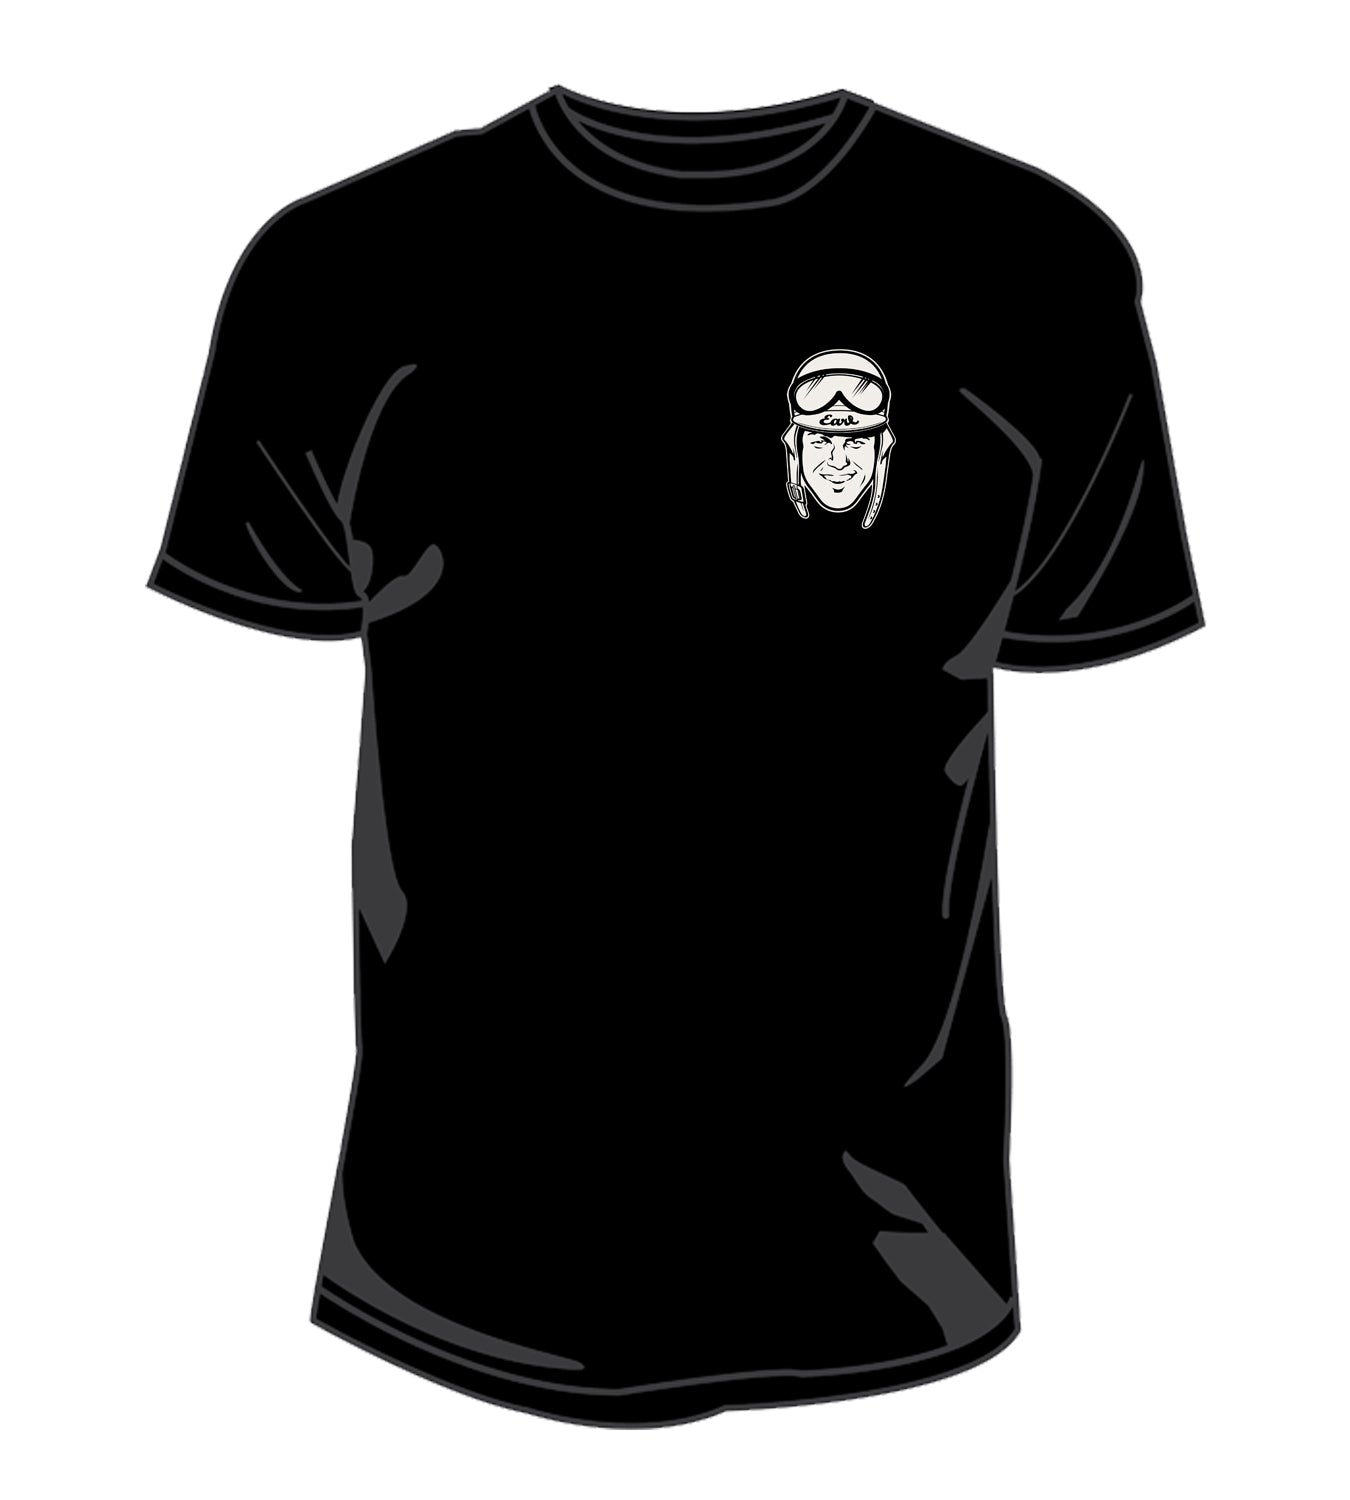 Earl Flag Face T-Shirt: This front left chest design features Earls handsome helmeted face that's been famously run on the streets of Los Angeles, Hollywood, Paris, England, Beijing, Japan, Australia, Brazil, etc.  This black t-shirt features 100% soft-spun 6.1 oz. cotton for a super comfy feel with plastisol ink screen printed graphics.